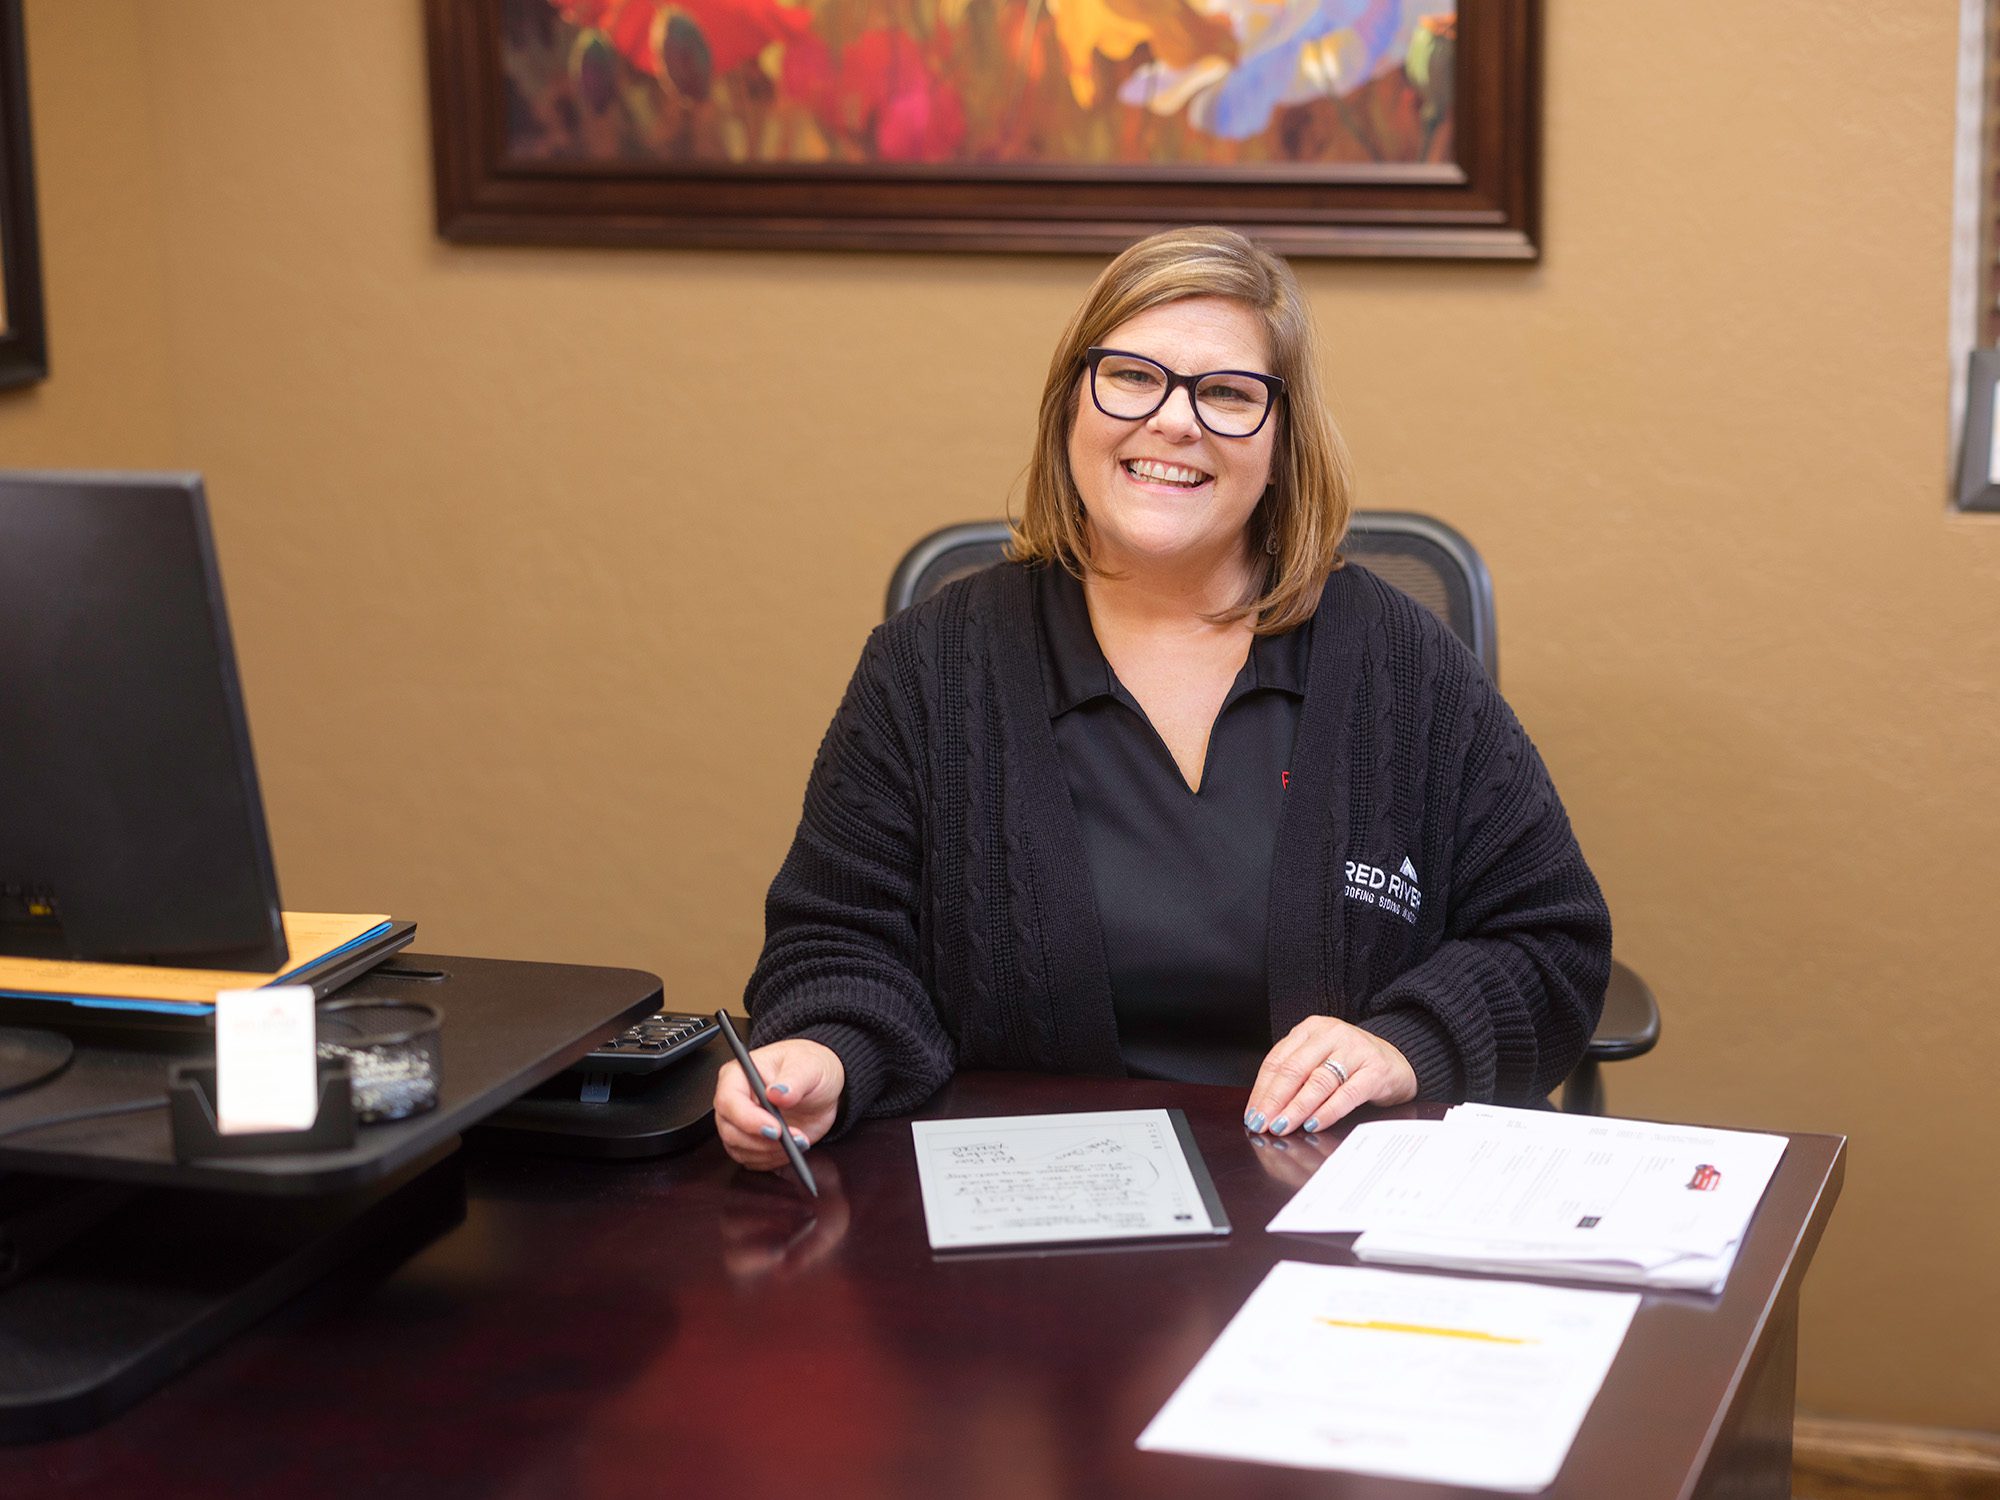 Red River Employee at desk with paperwork smiling